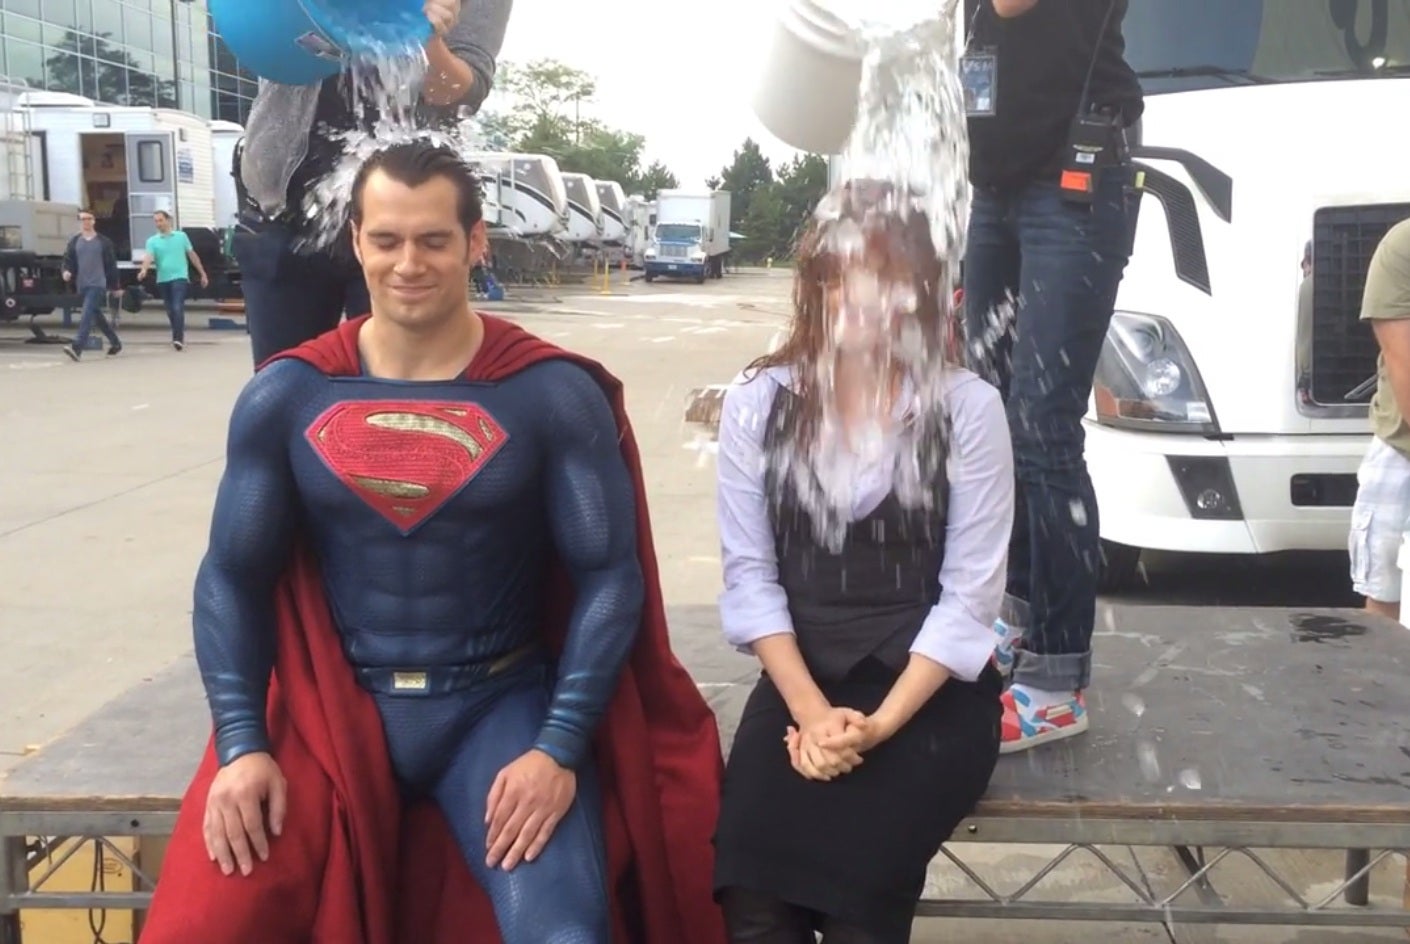 Even Henry Cavill and Amy Adams found time to take the challenge during Batman v Superman filming